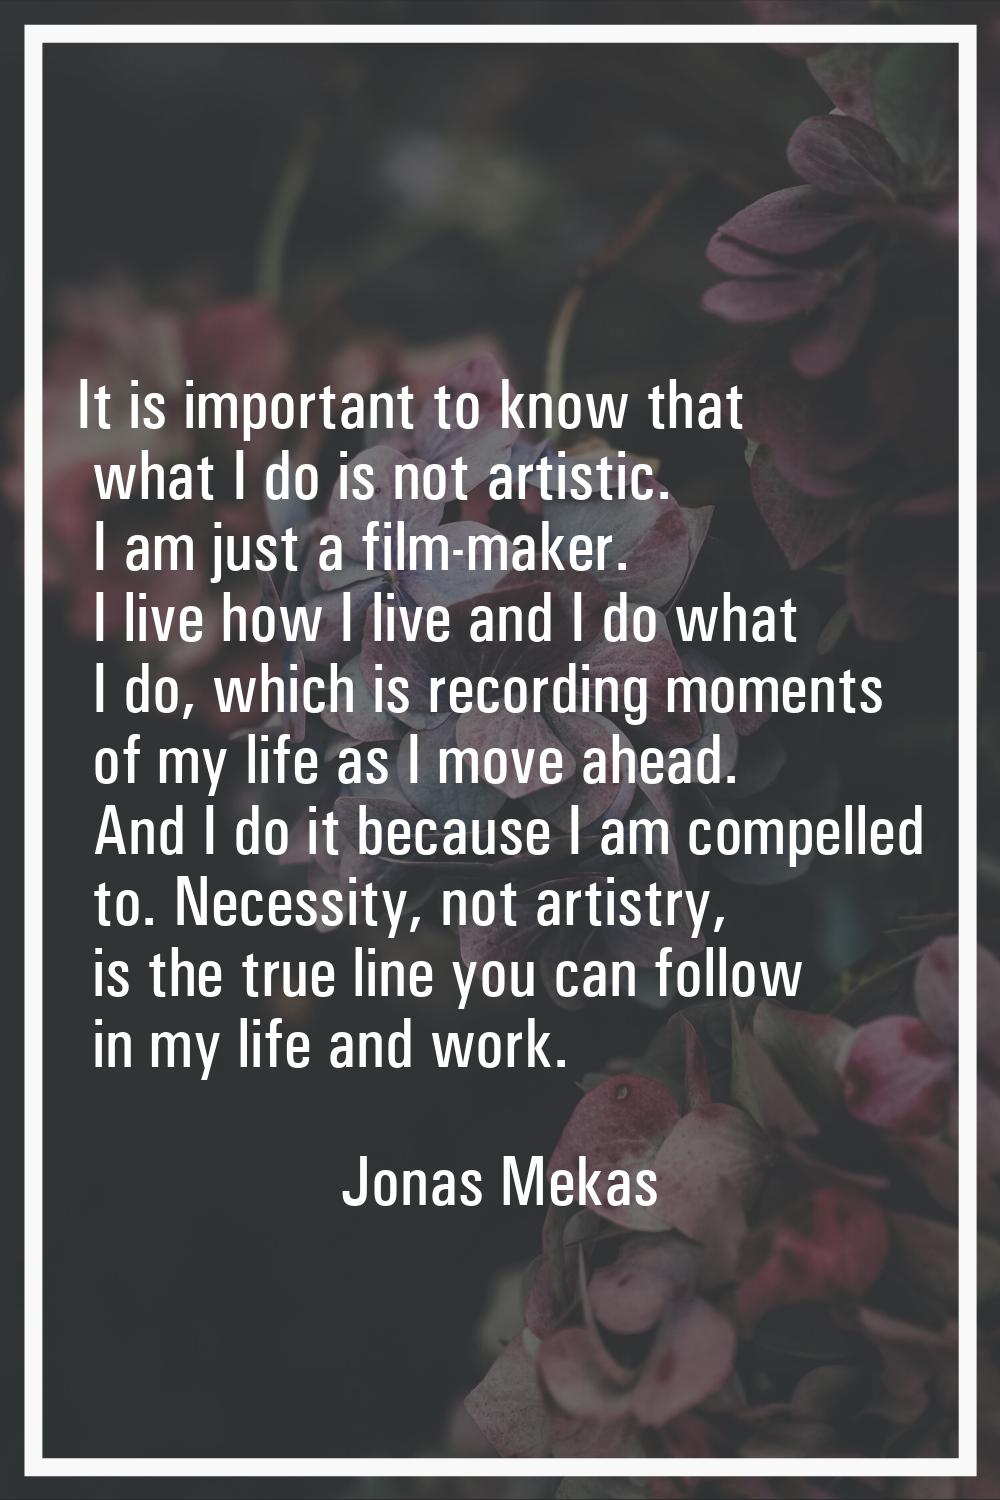 It is important to know that what I do is not artistic. I am just a film-maker. I live how I live a